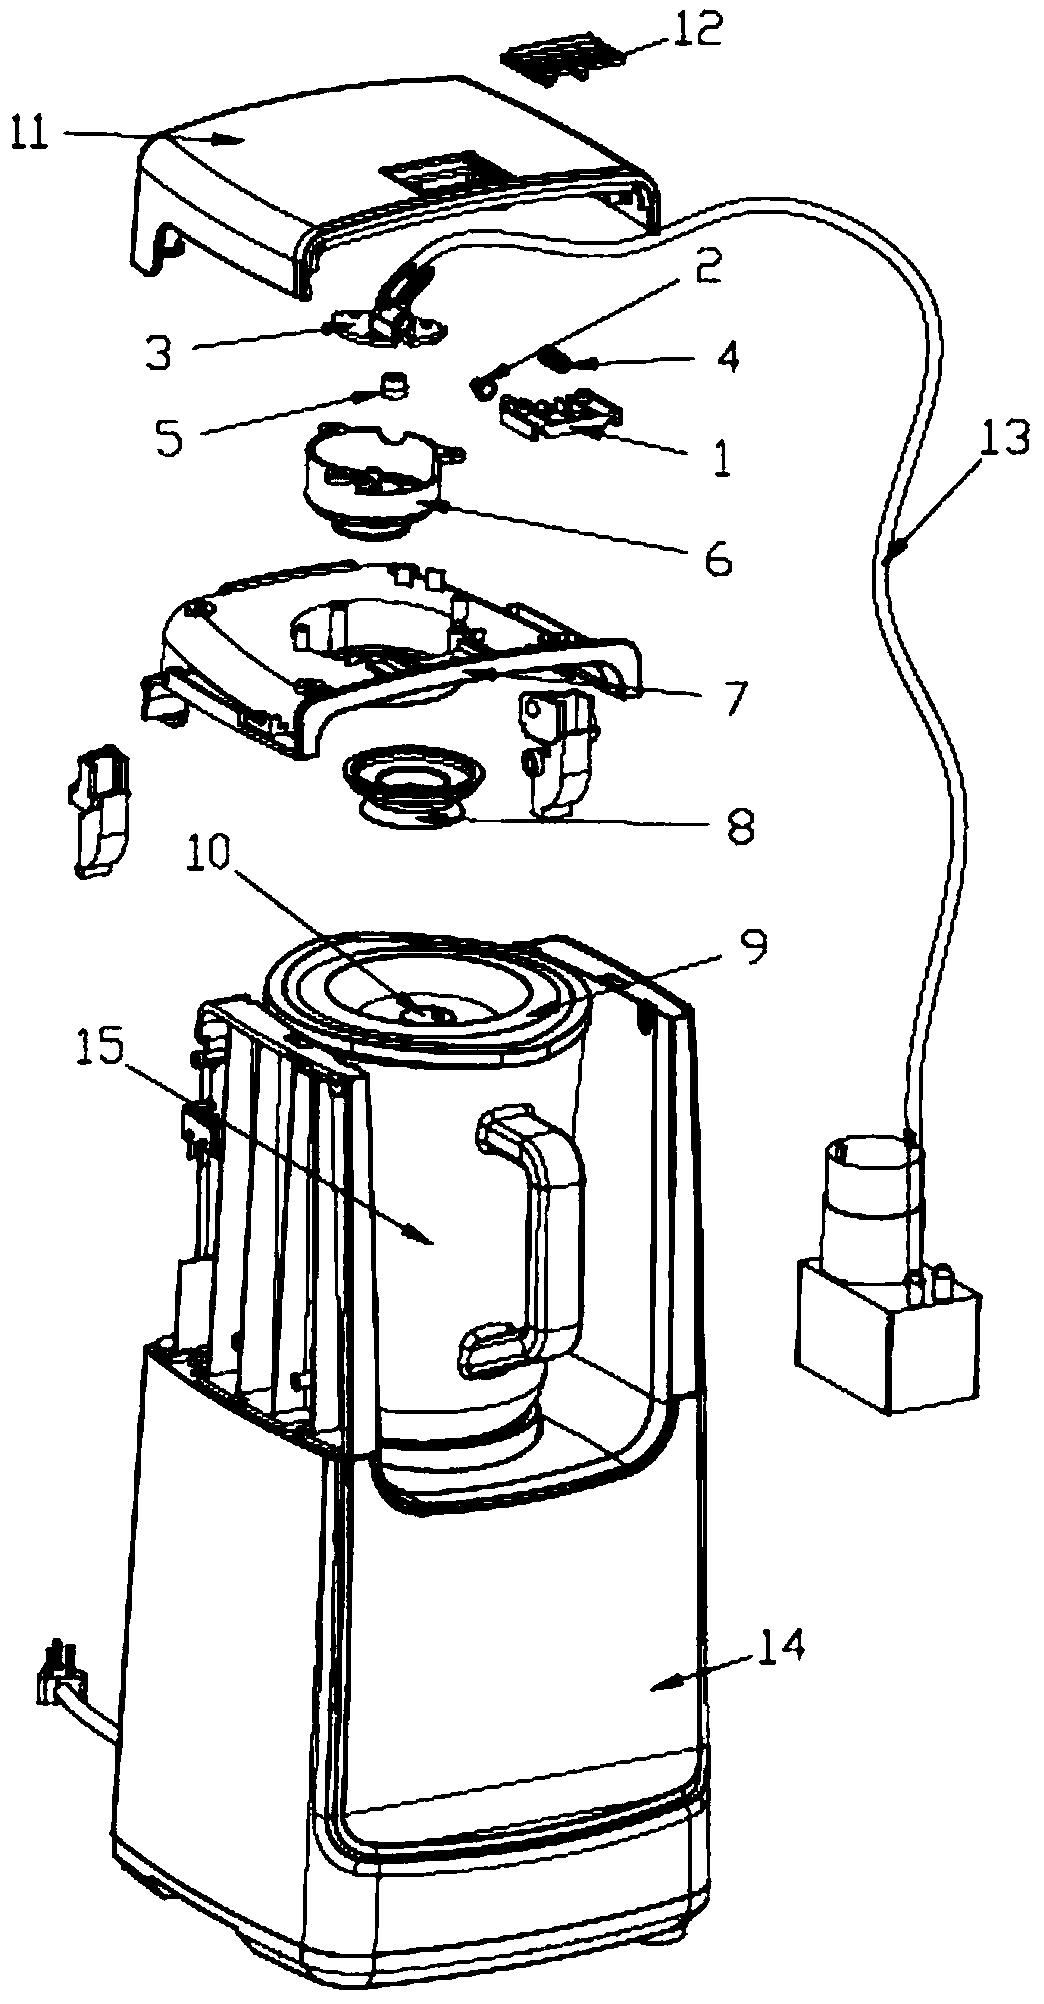 Vacuumizing cover opening device with air leakage function and high speed blender